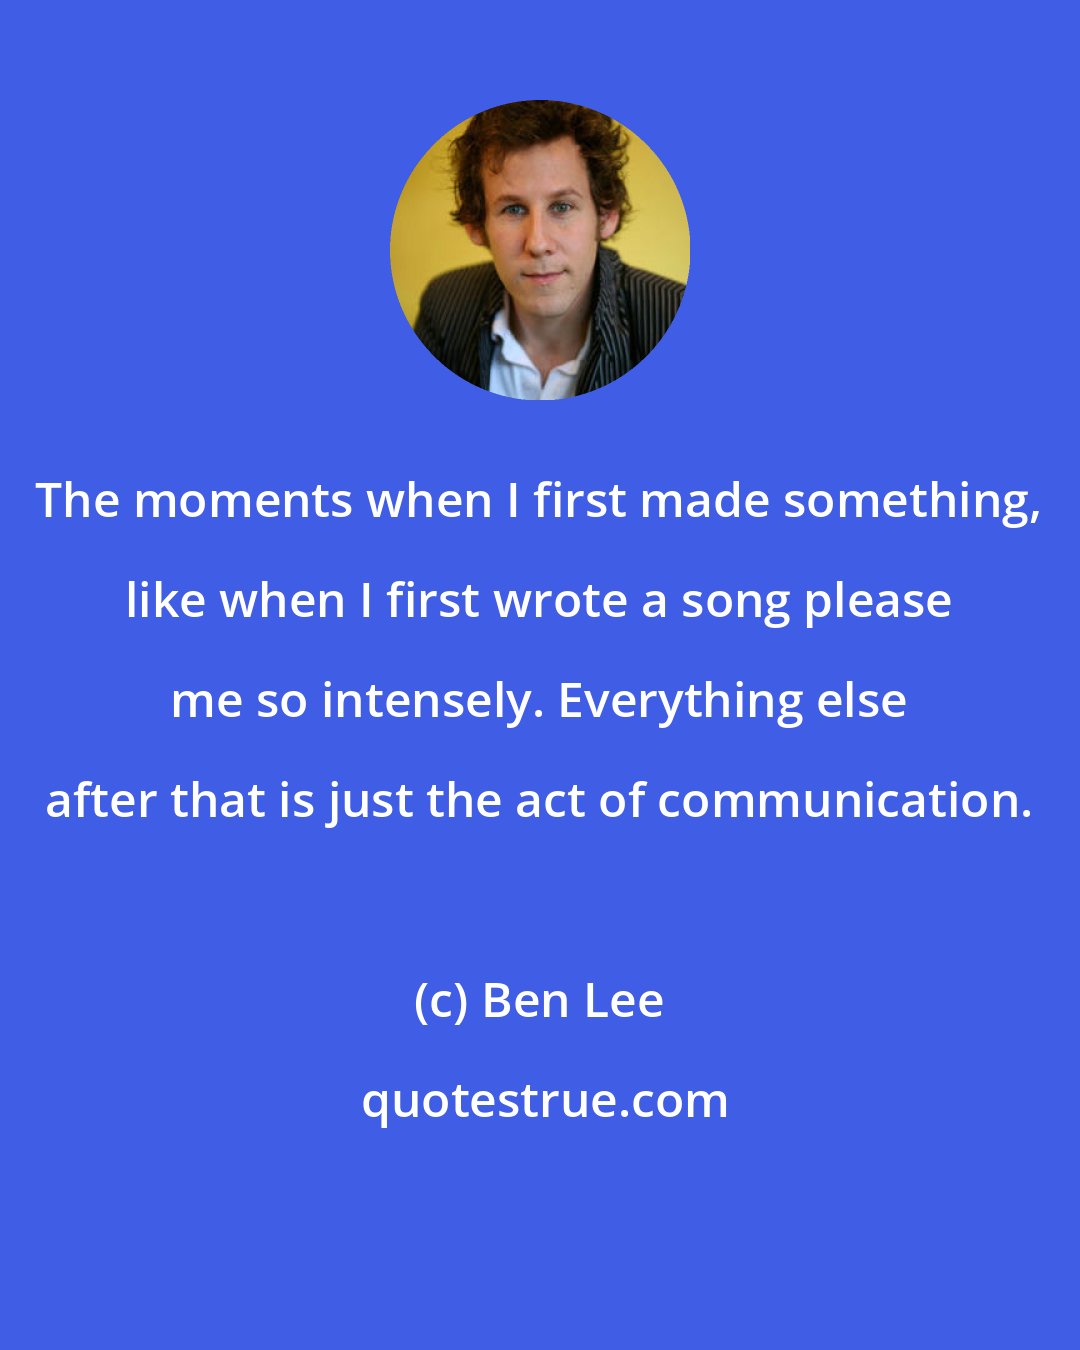 Ben Lee: The moments when I first made something, like when I first wrote a song please me so intensely. Everything else after that is just the act of communication.